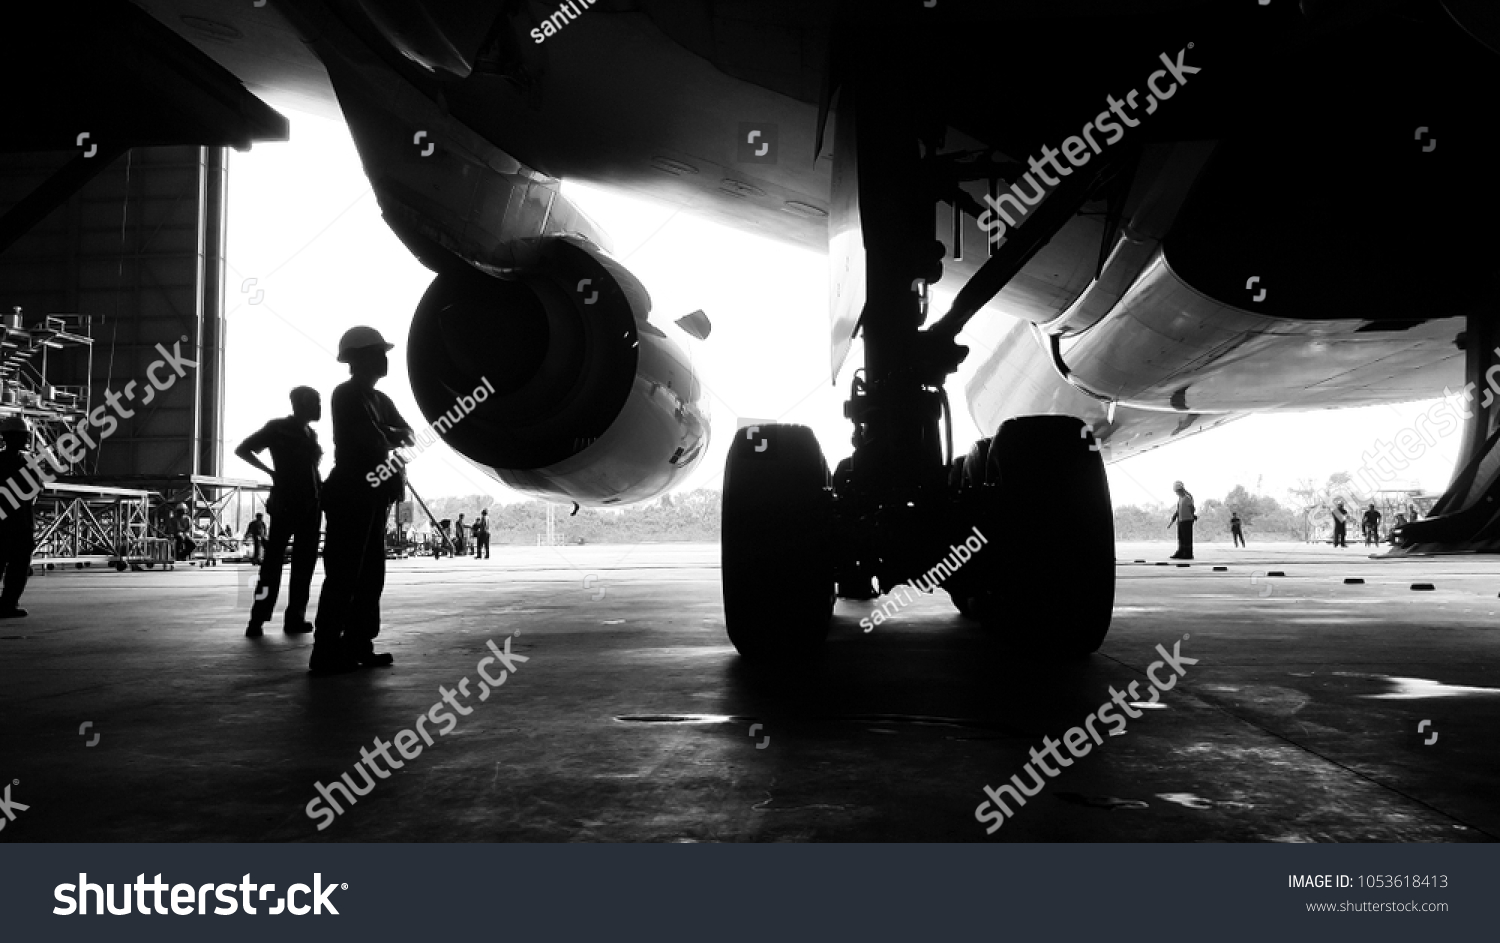 Aircraft push back into the  maintenance area.Aircraft(airplane)in aircraft hangar for maintenance service check by aircraft technician.Maintenance before flight. #1053618413